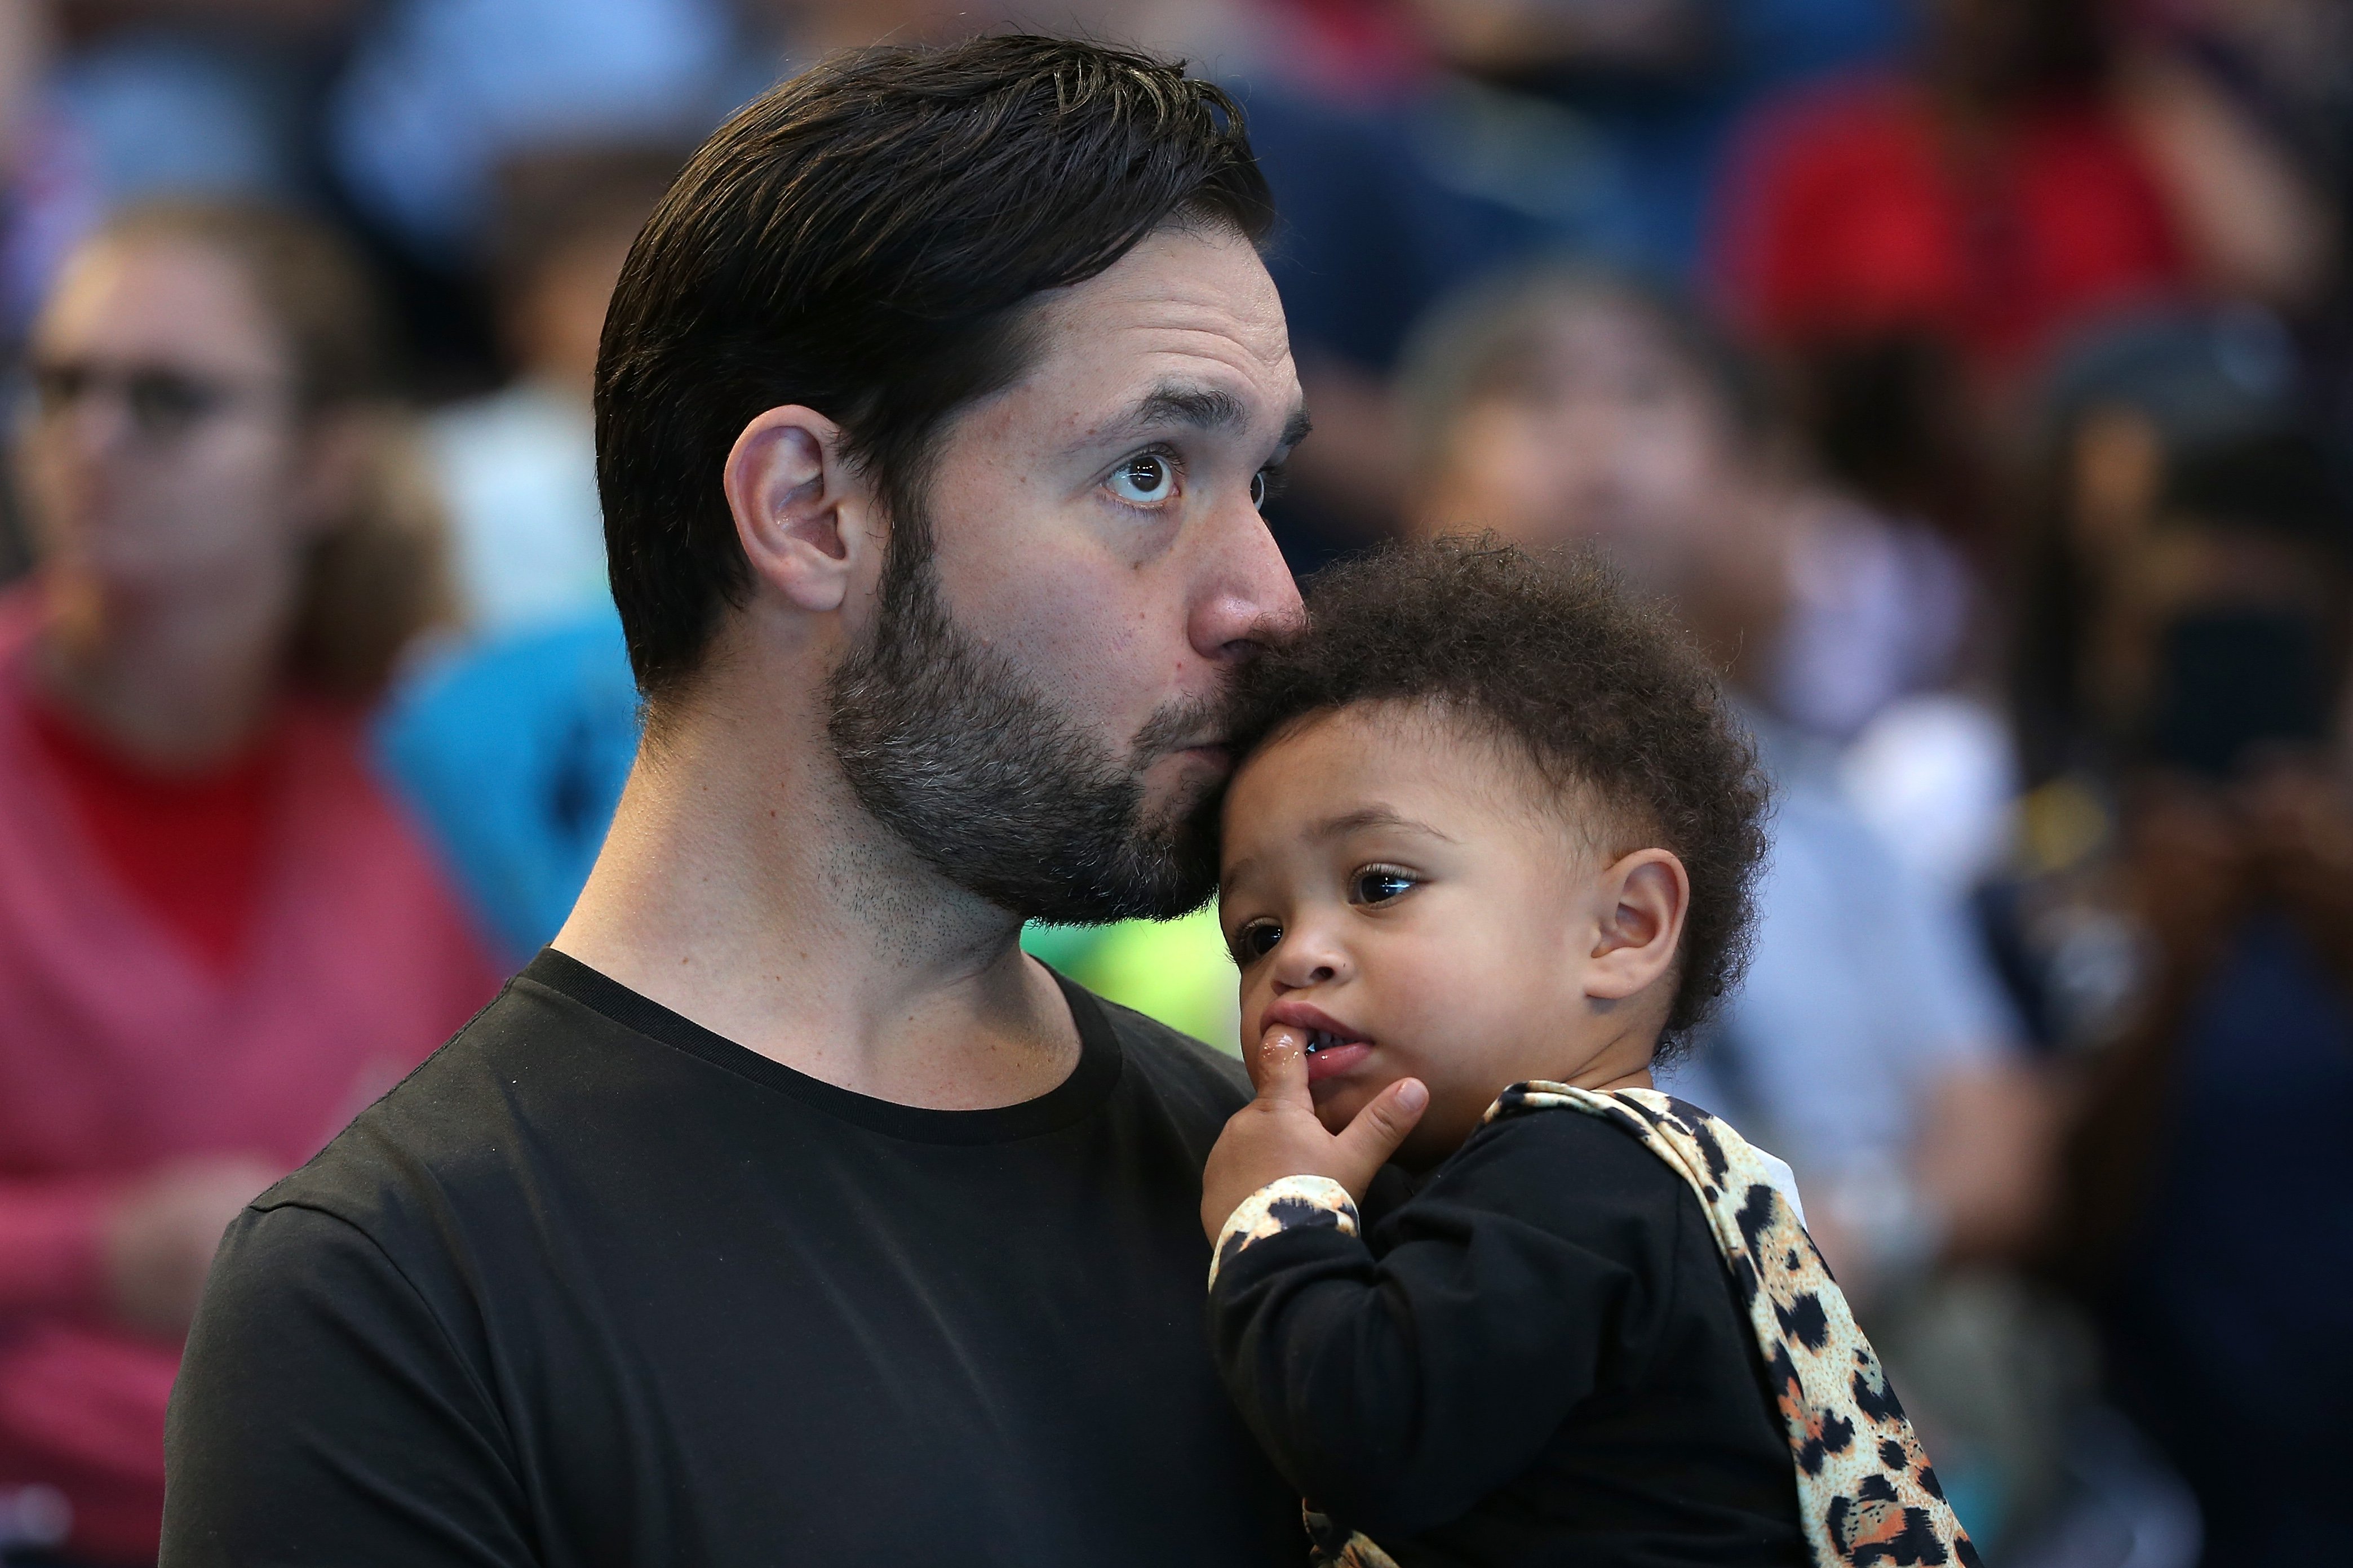 Alexis Ohanian and his daughter Alexis Olympia Ohanian Jr. at the women's singles match during day six of the Hopman Cup on January 3, 2019, in Perth, Australia | Source: Getty Images